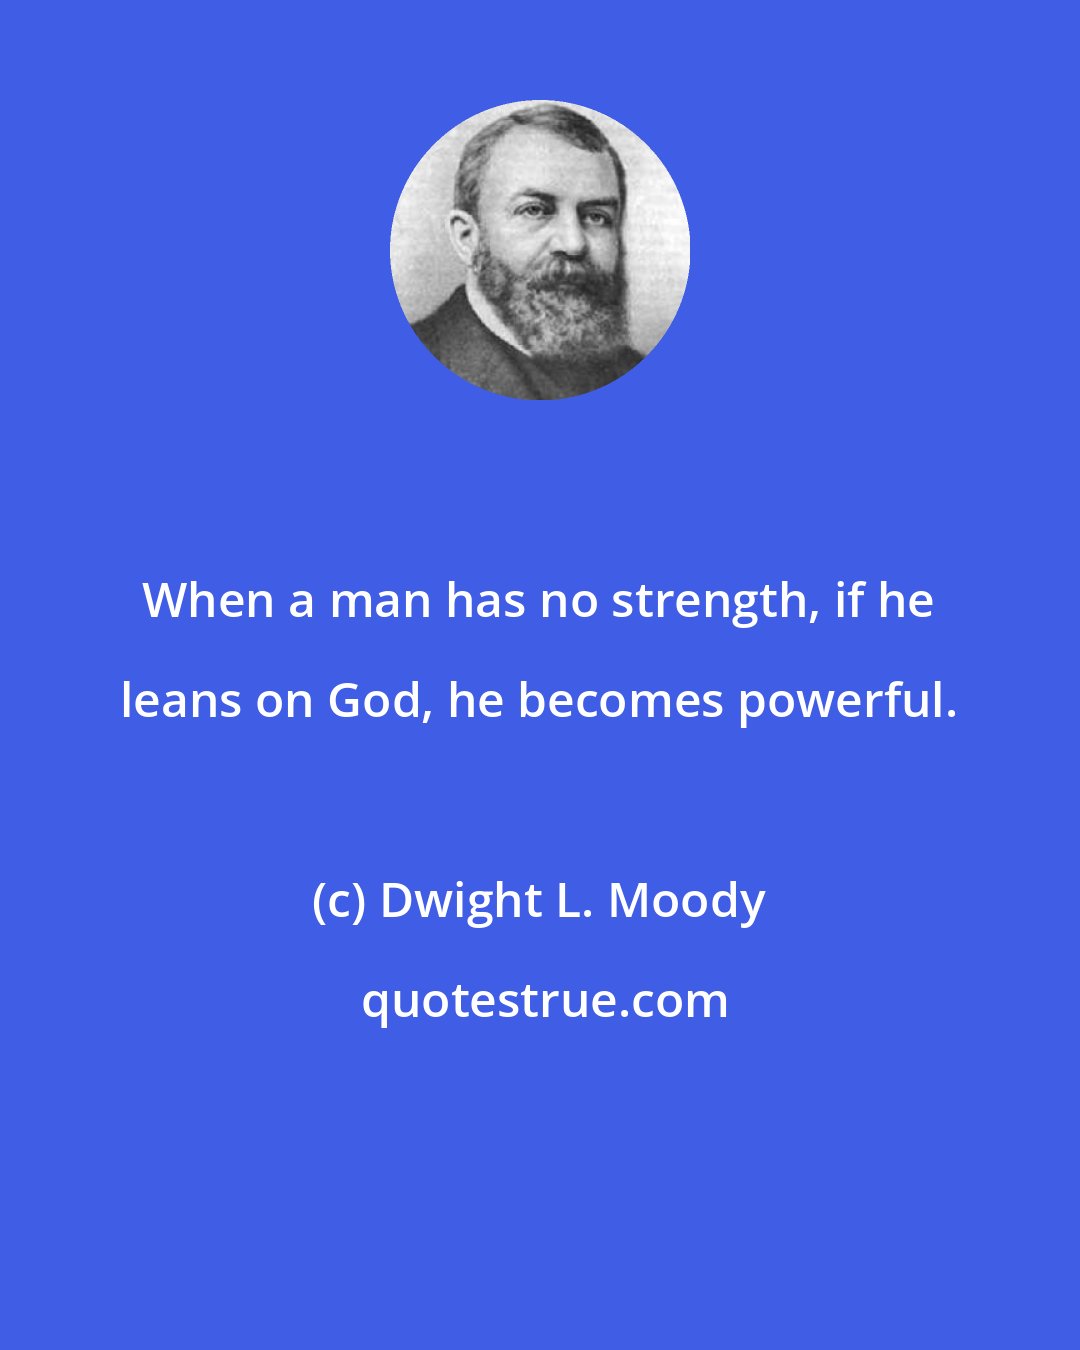 Dwight L. Moody: When a man has no strength, if he leans on God, he becomes powerful.